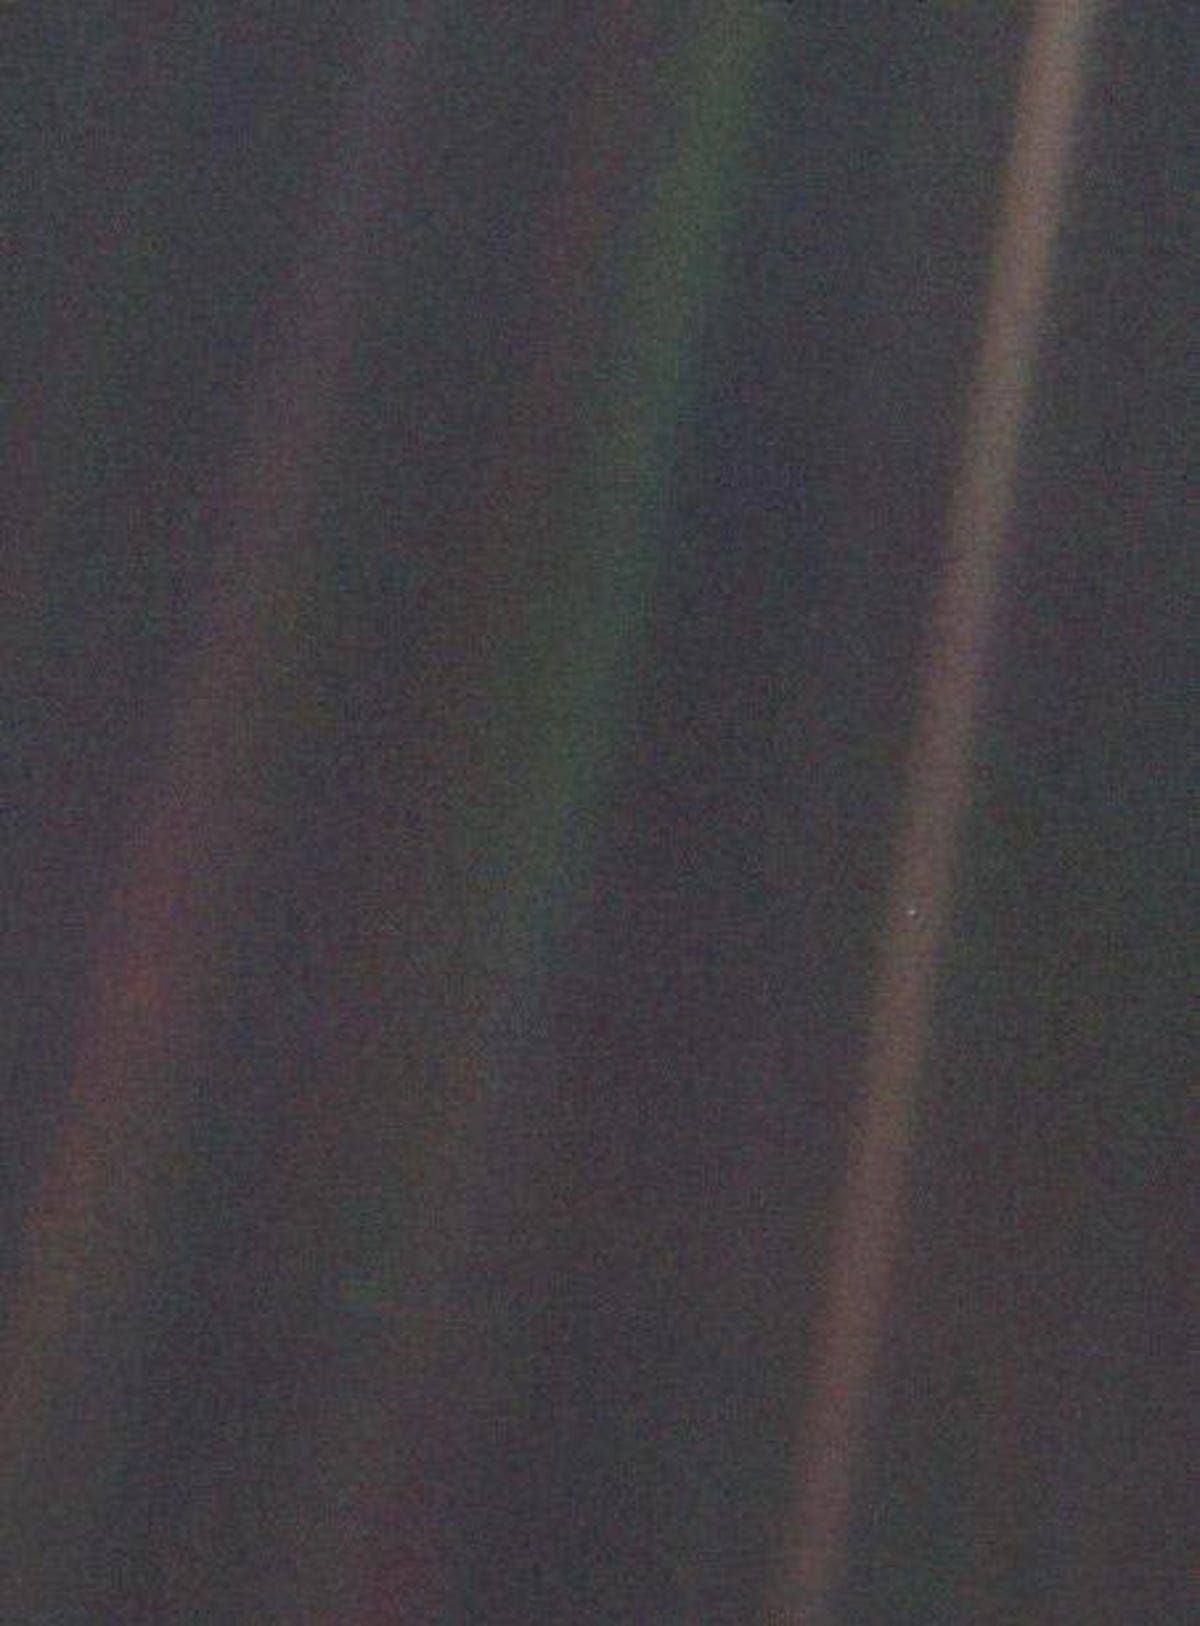 narrow-angle_color_image_of_the_Earth_taken_by_Voyager_1.jpg